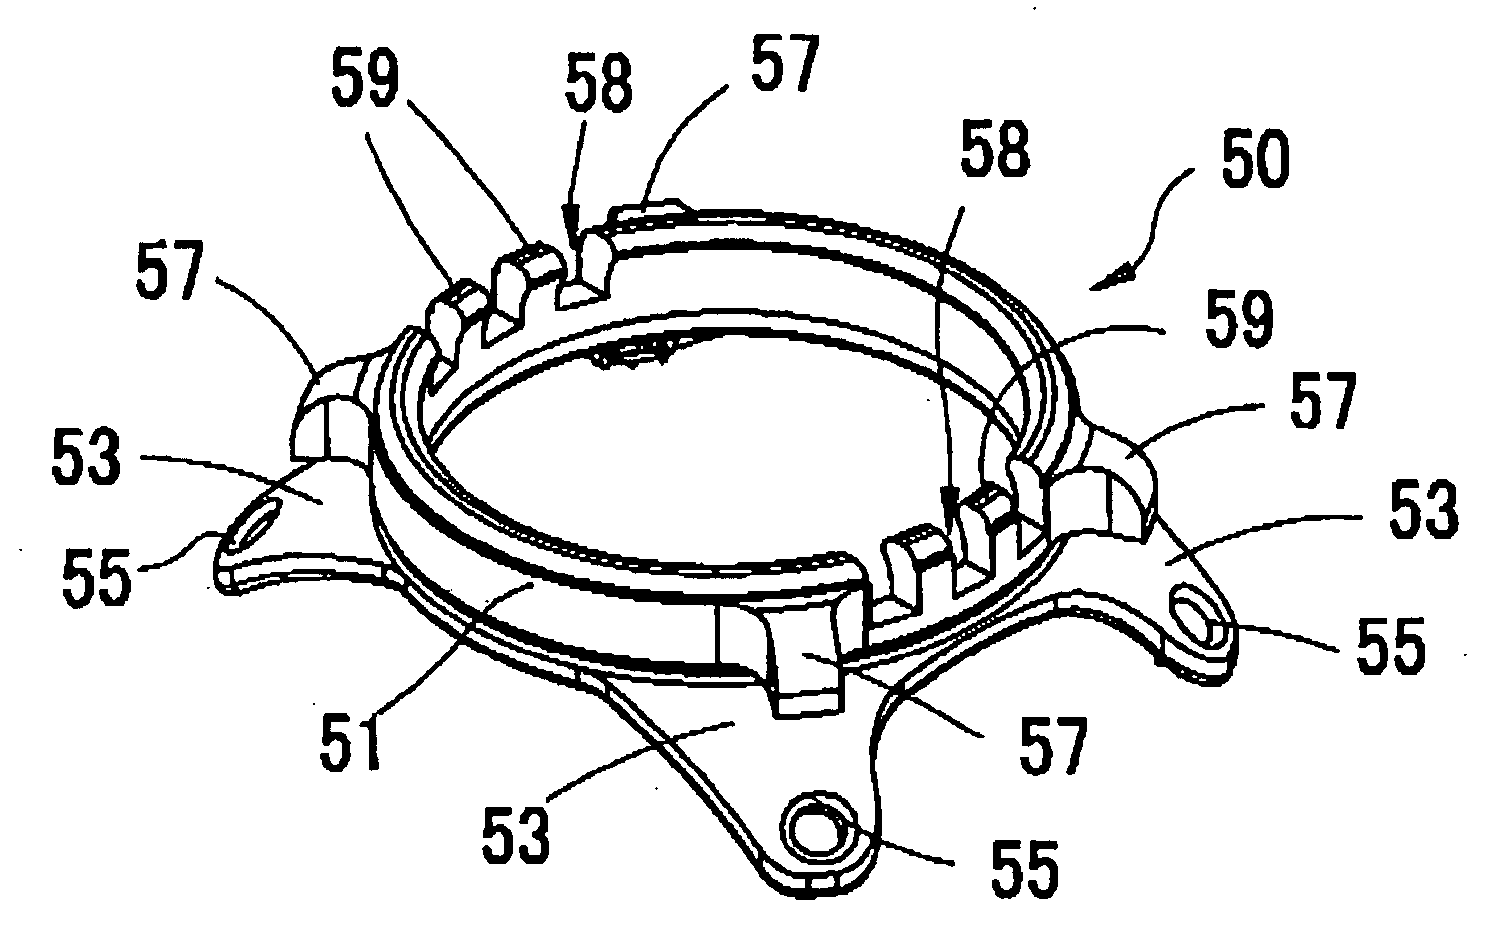 Ring for vitreous surgery for supporting contact lens for the vitreous surgery, cannula used in combination with the ring, and plug used in combination with the ring